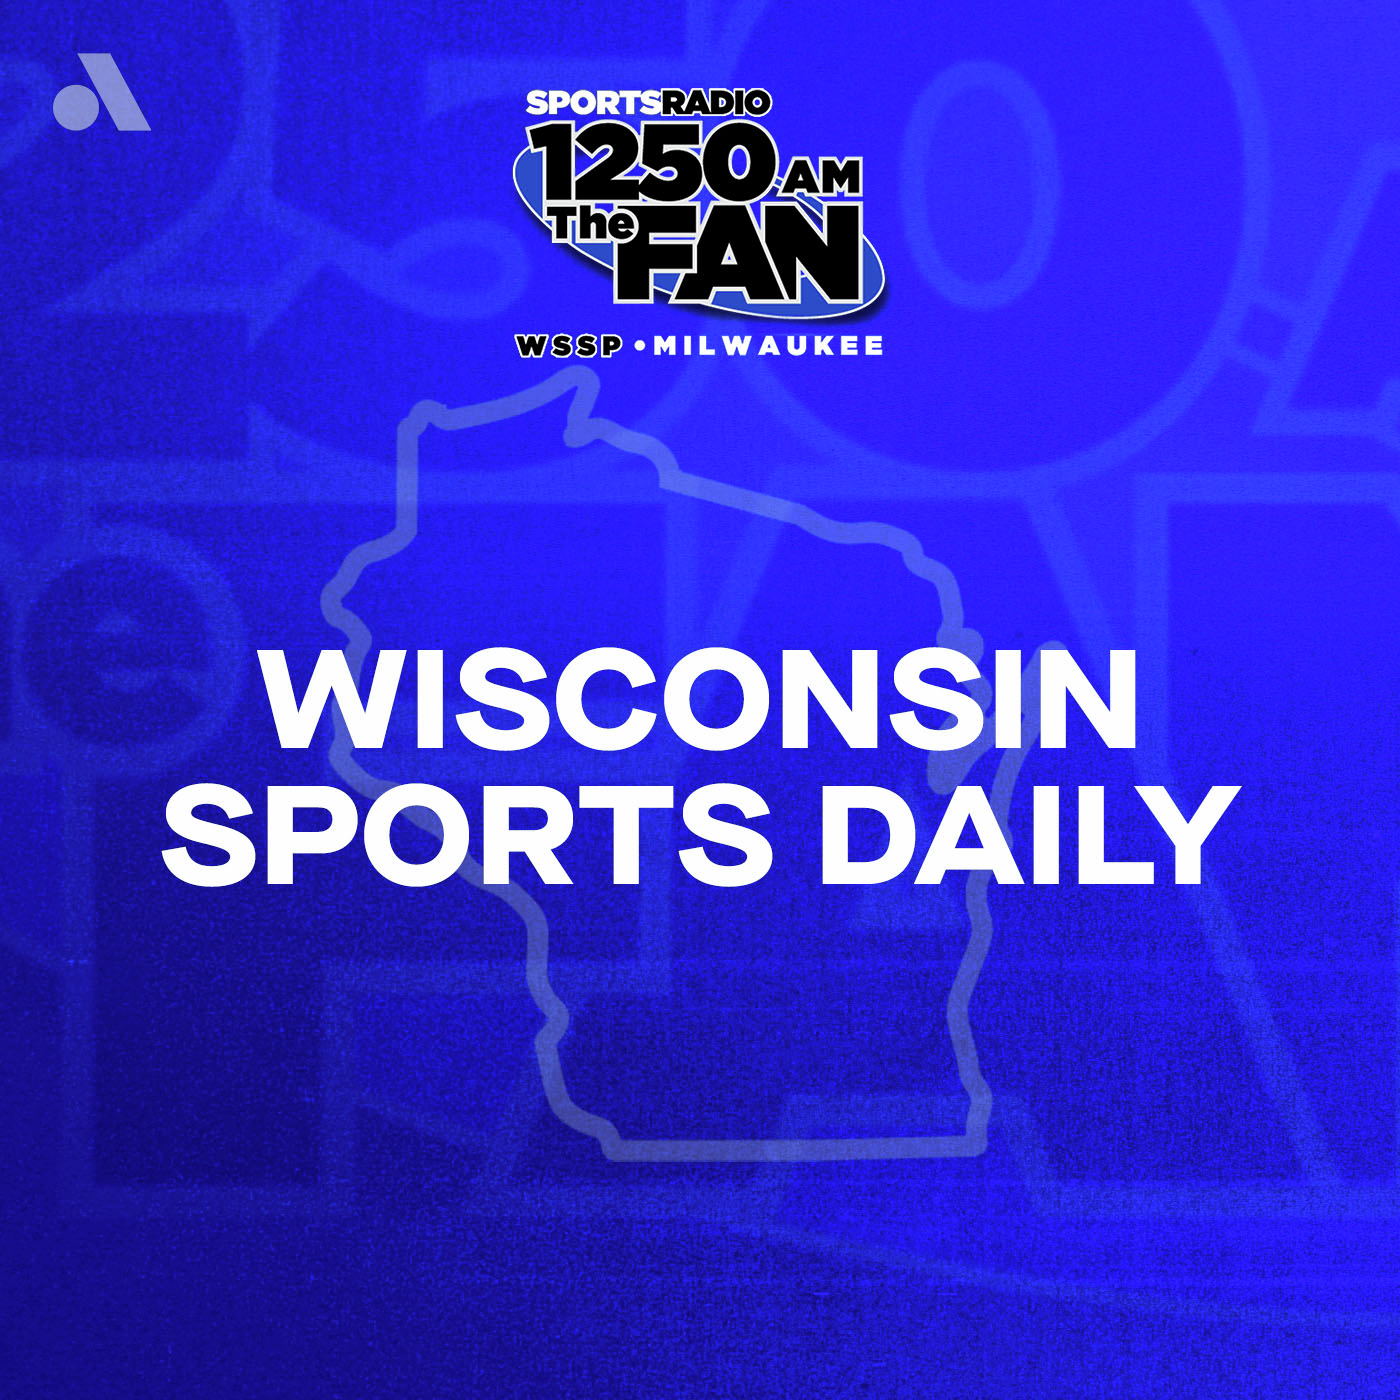 Friday, May 24th: Talk About the Crew! Curt Hogg Joins Wisconsin Sports Daily